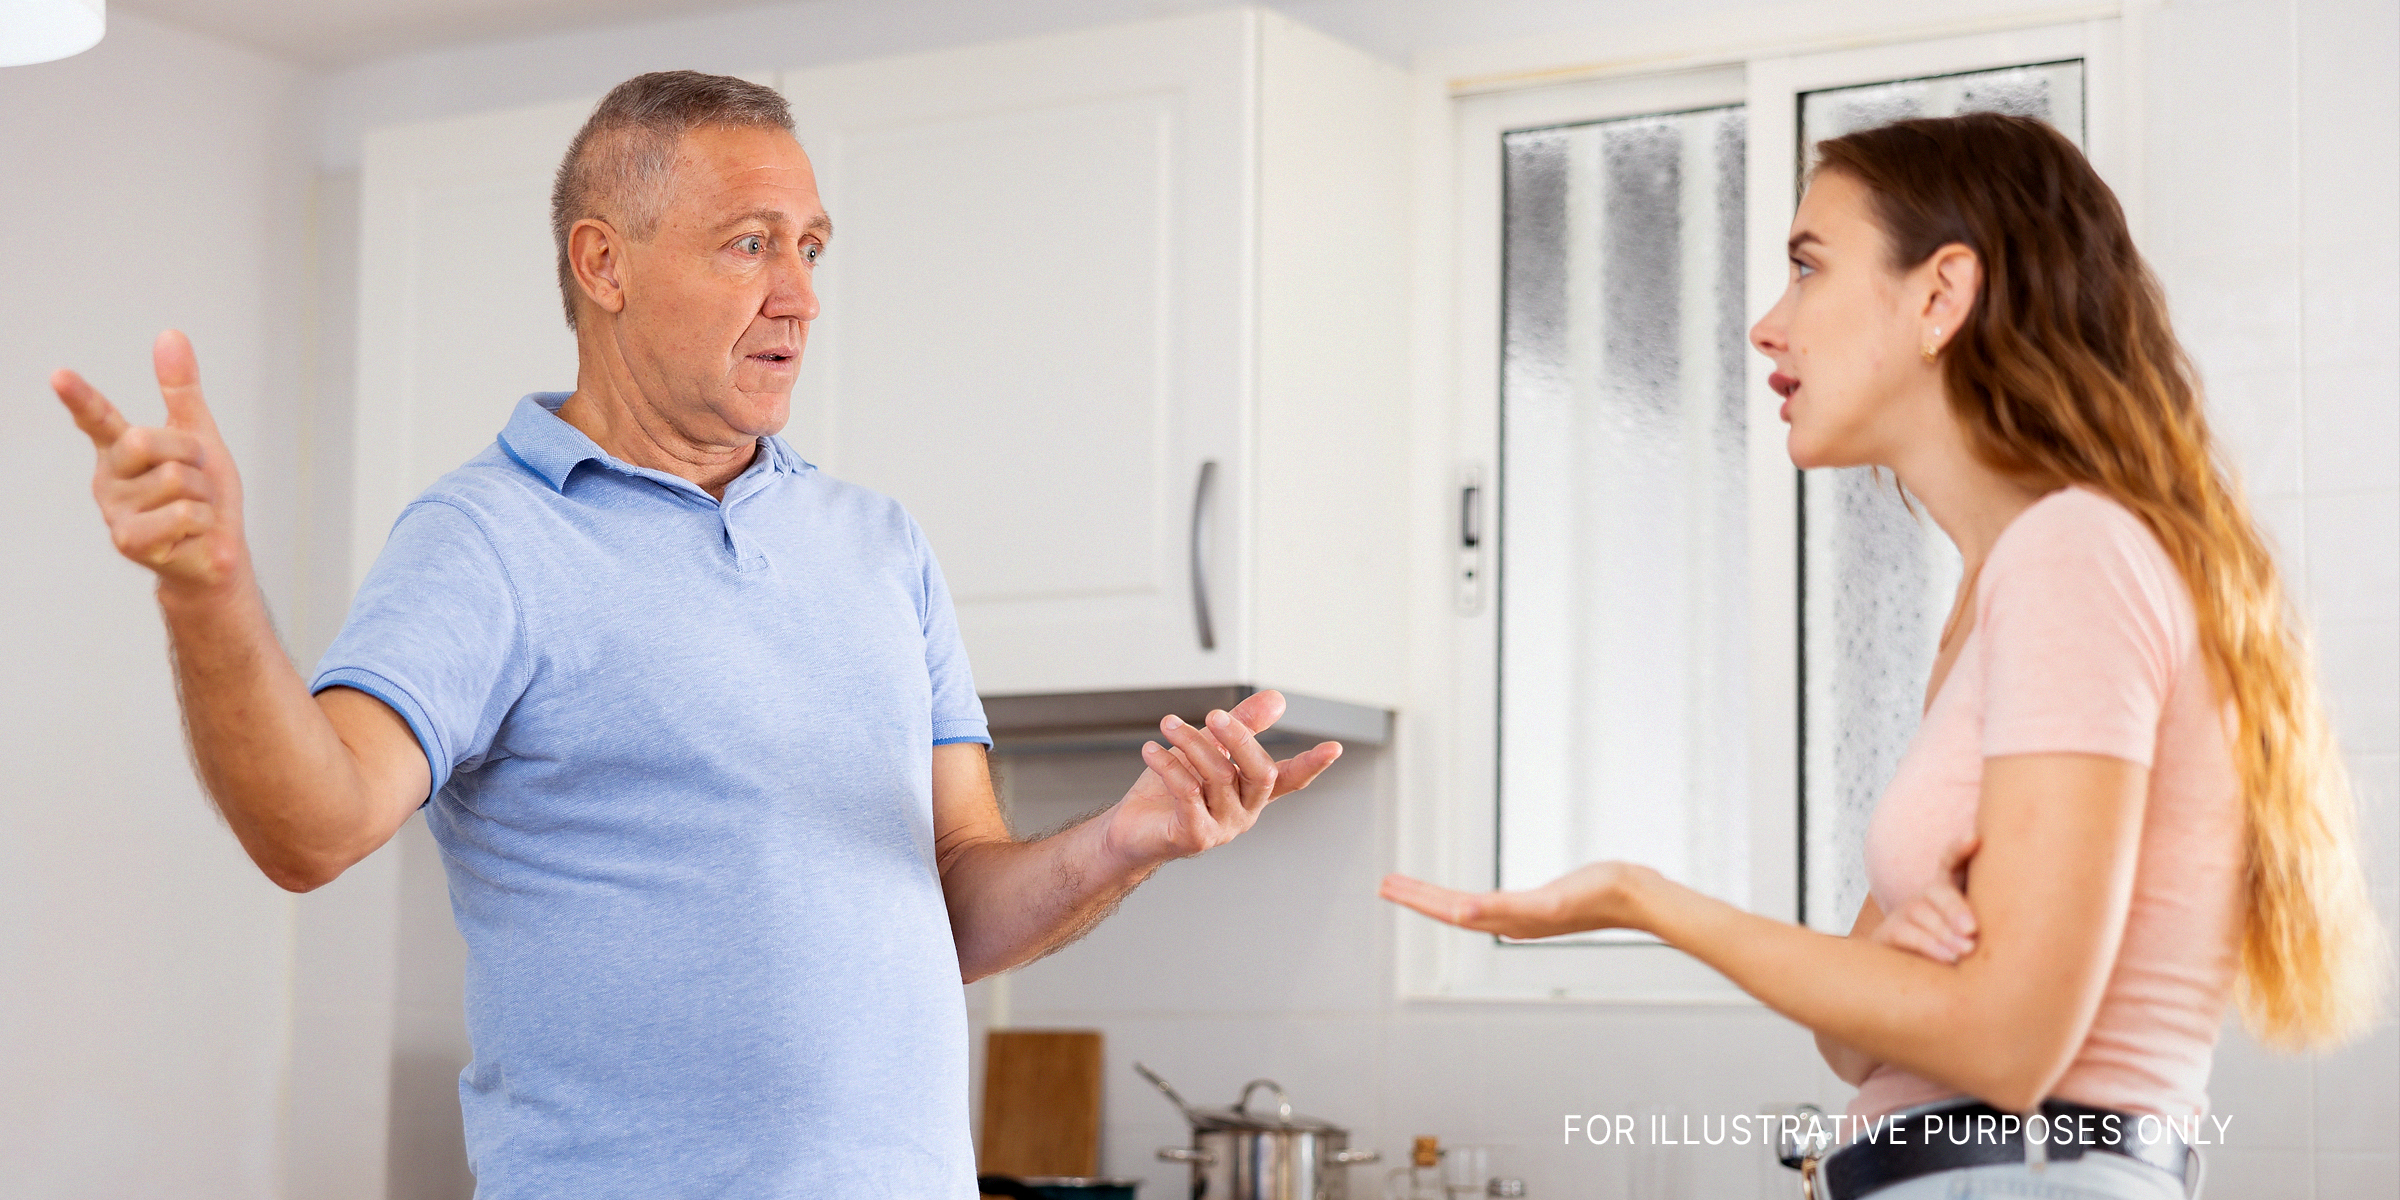 A father and daughter are seen arguing in the kitchen area | Source: Shutterstock